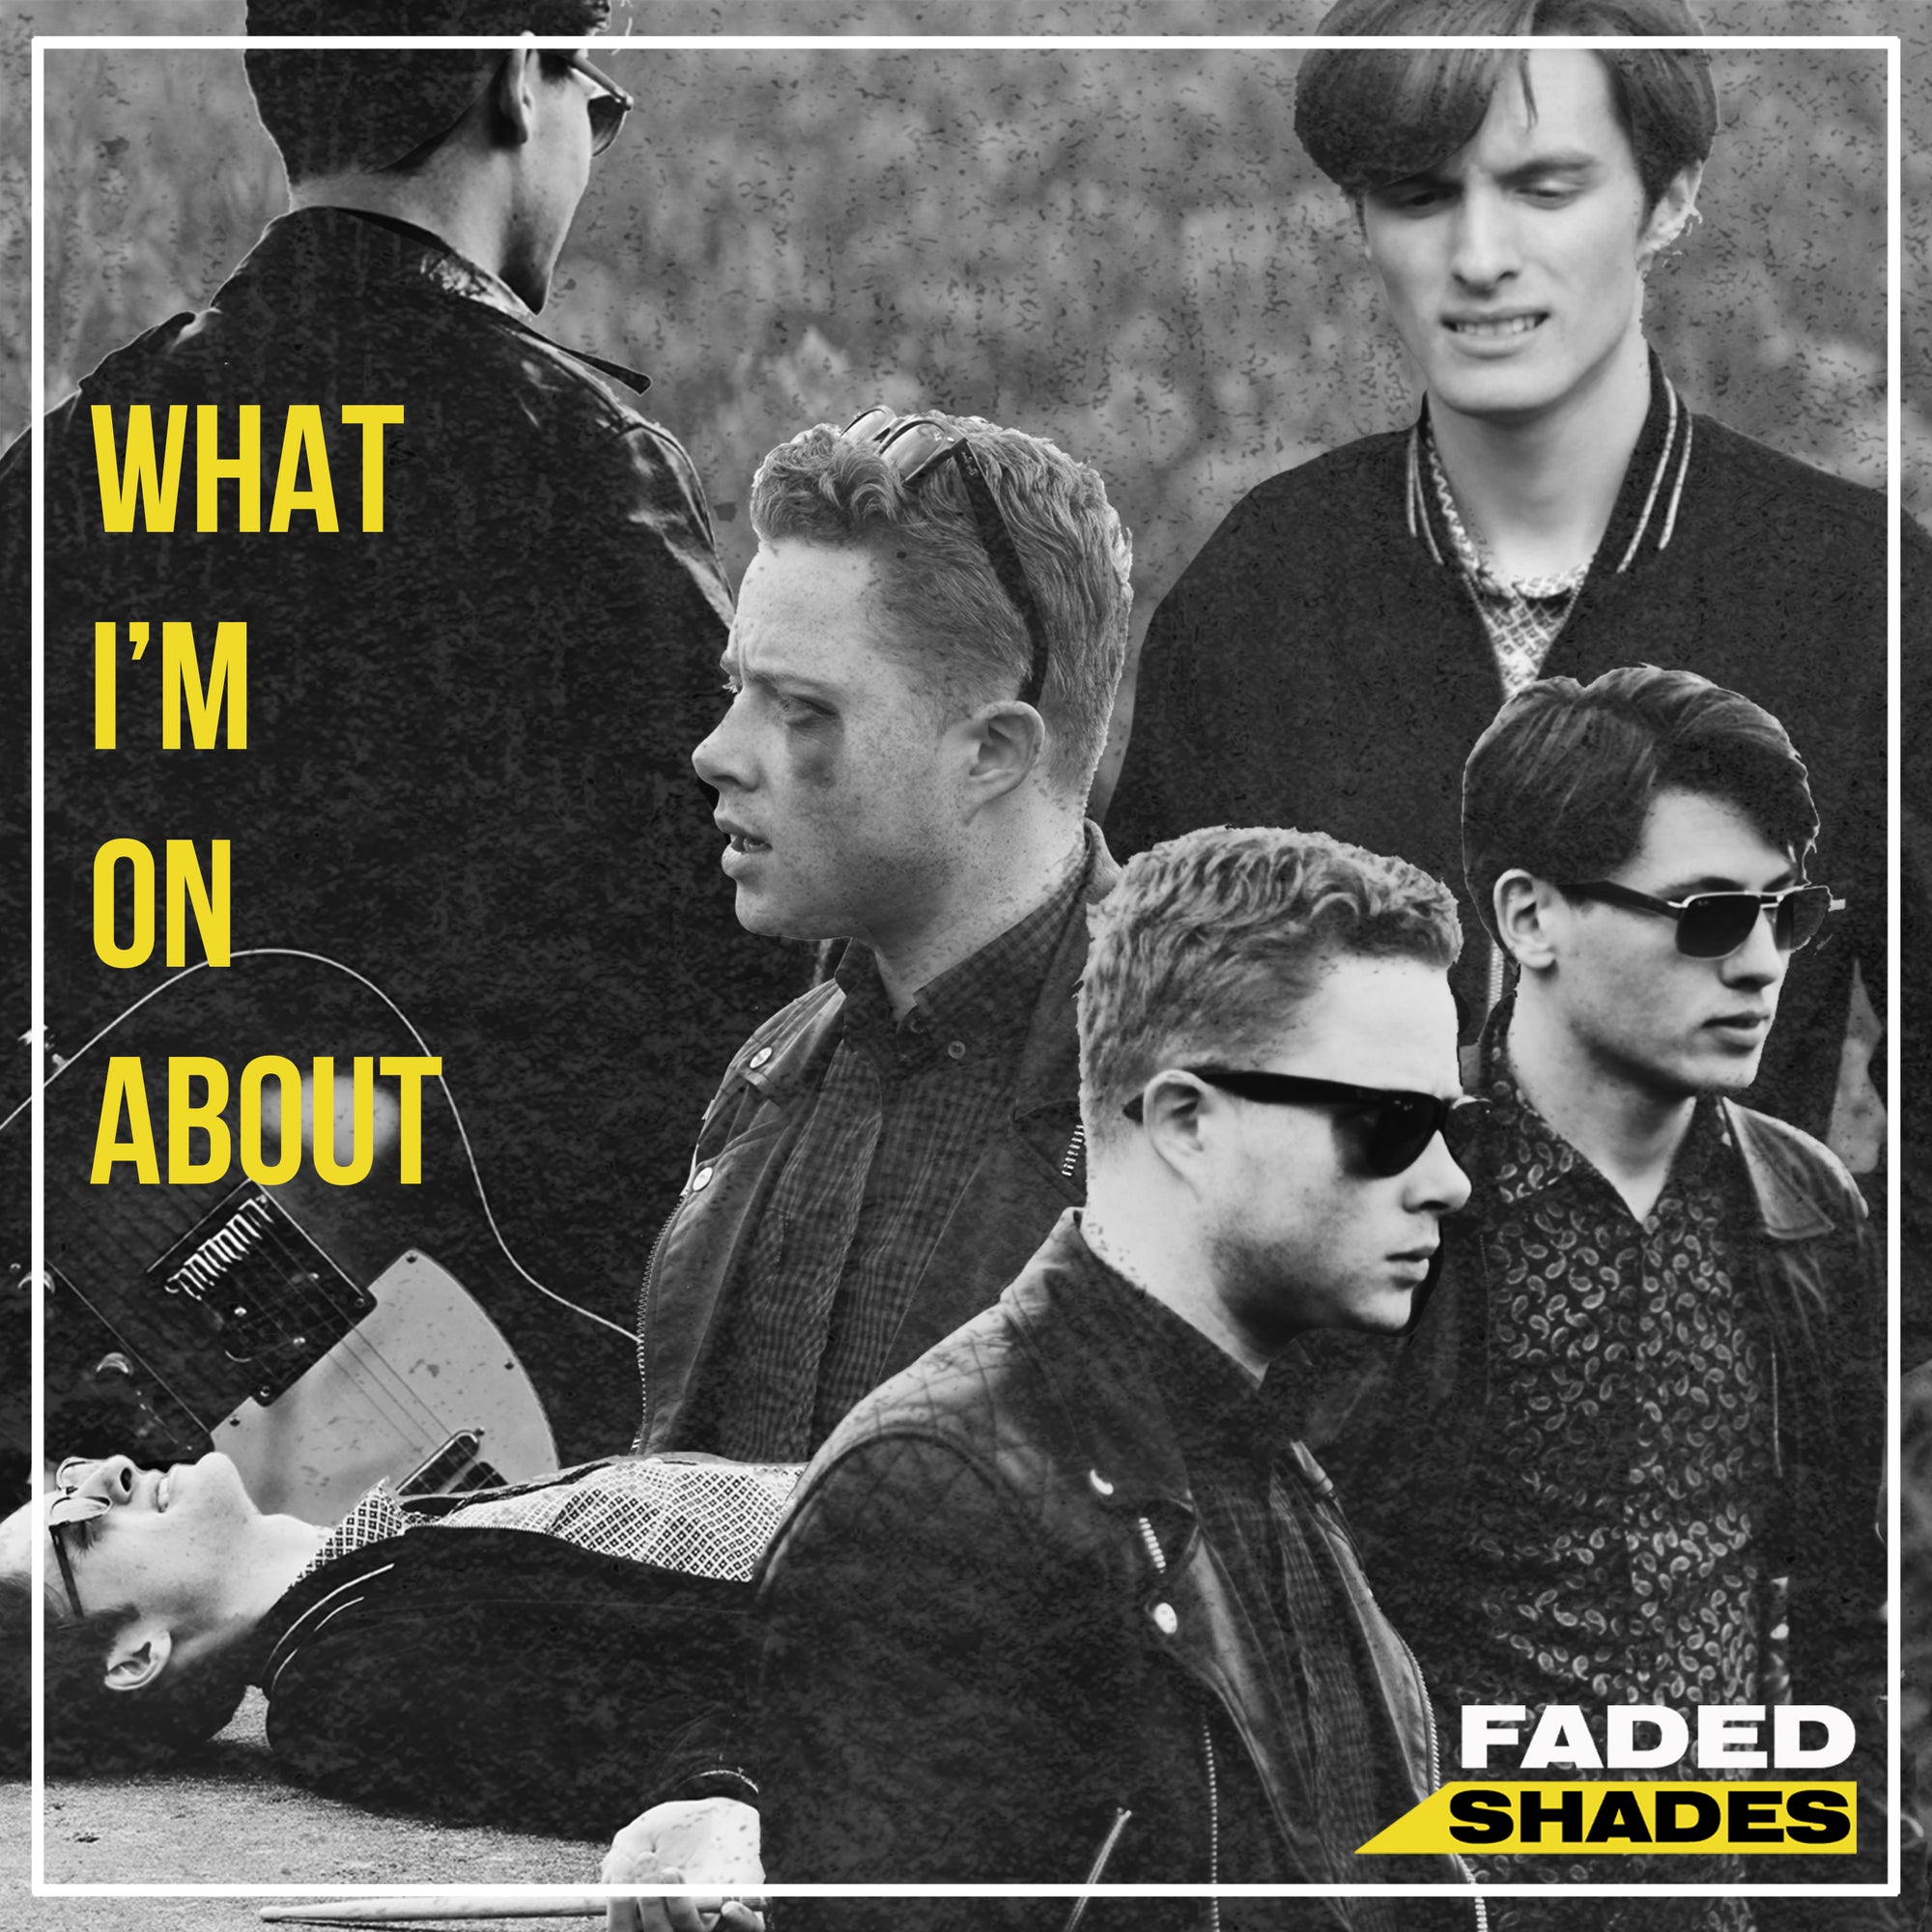 Swanley's Faded Shades Drop Raucous New Single 'What I'm On About'